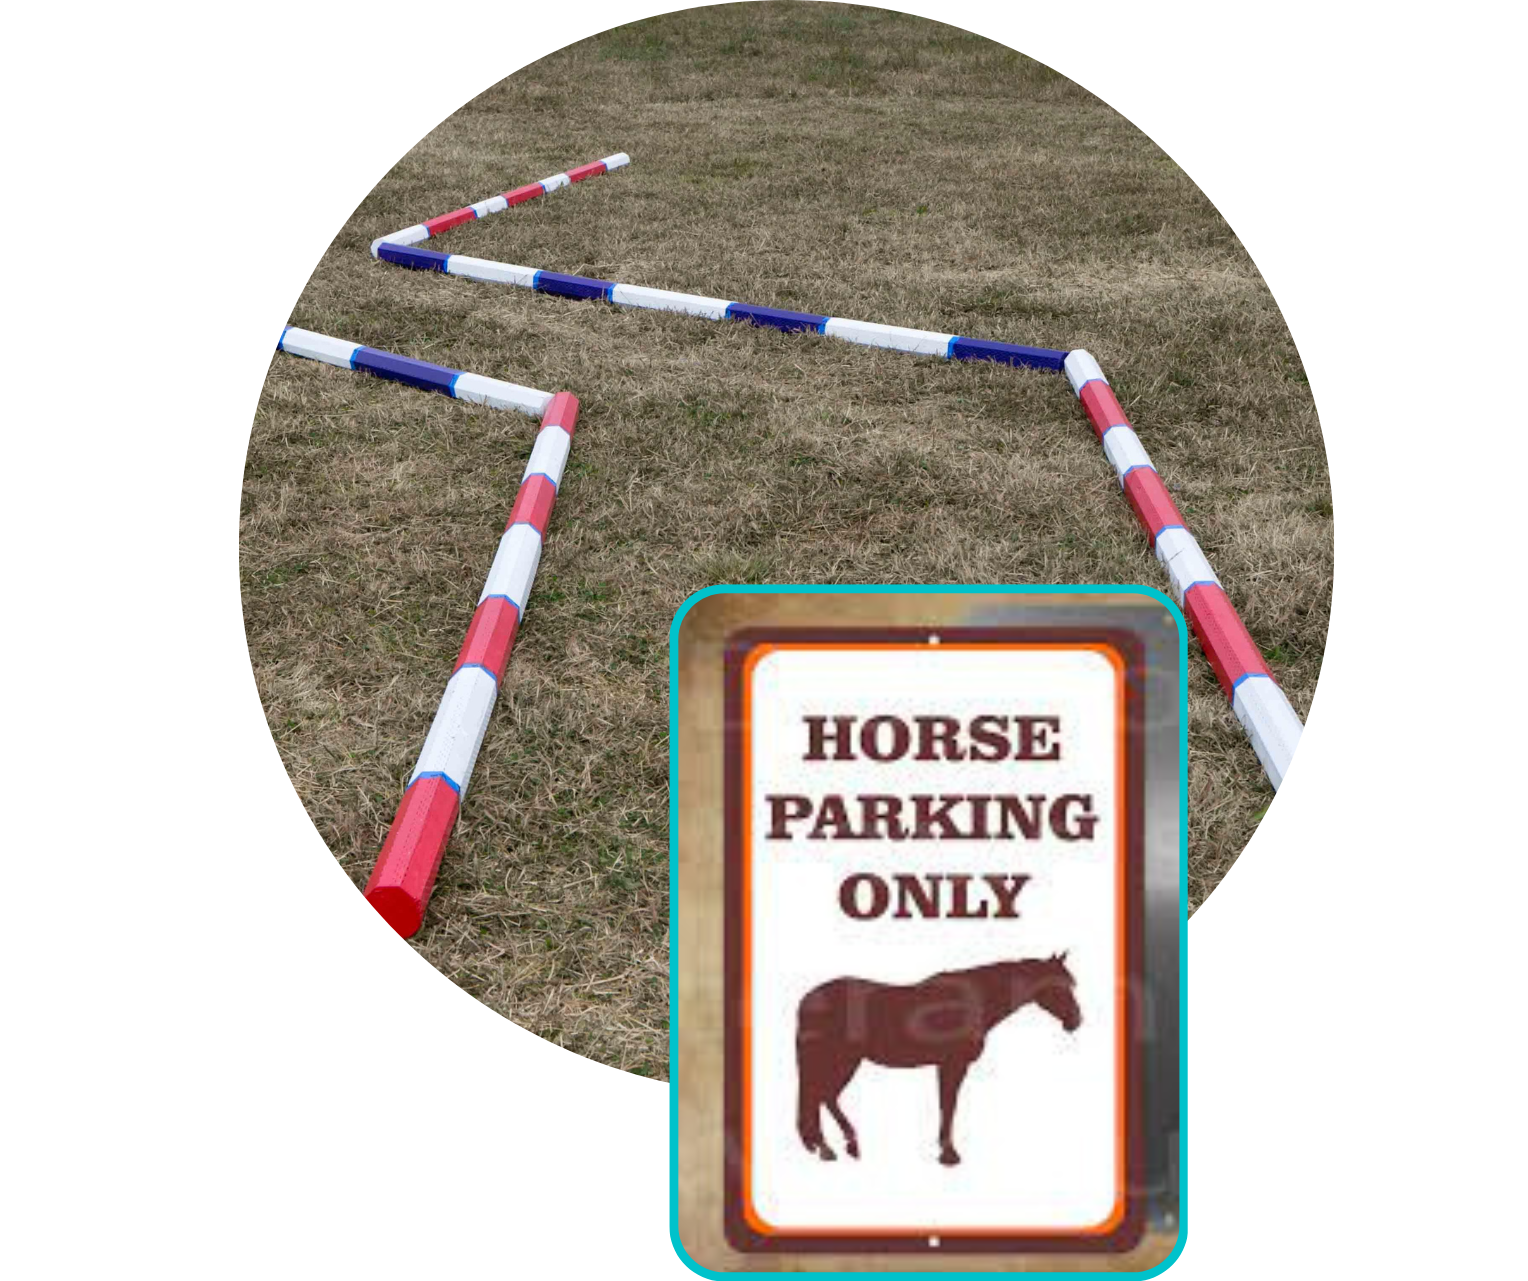 Striped red white and blue ground poles and a horse parking sign.